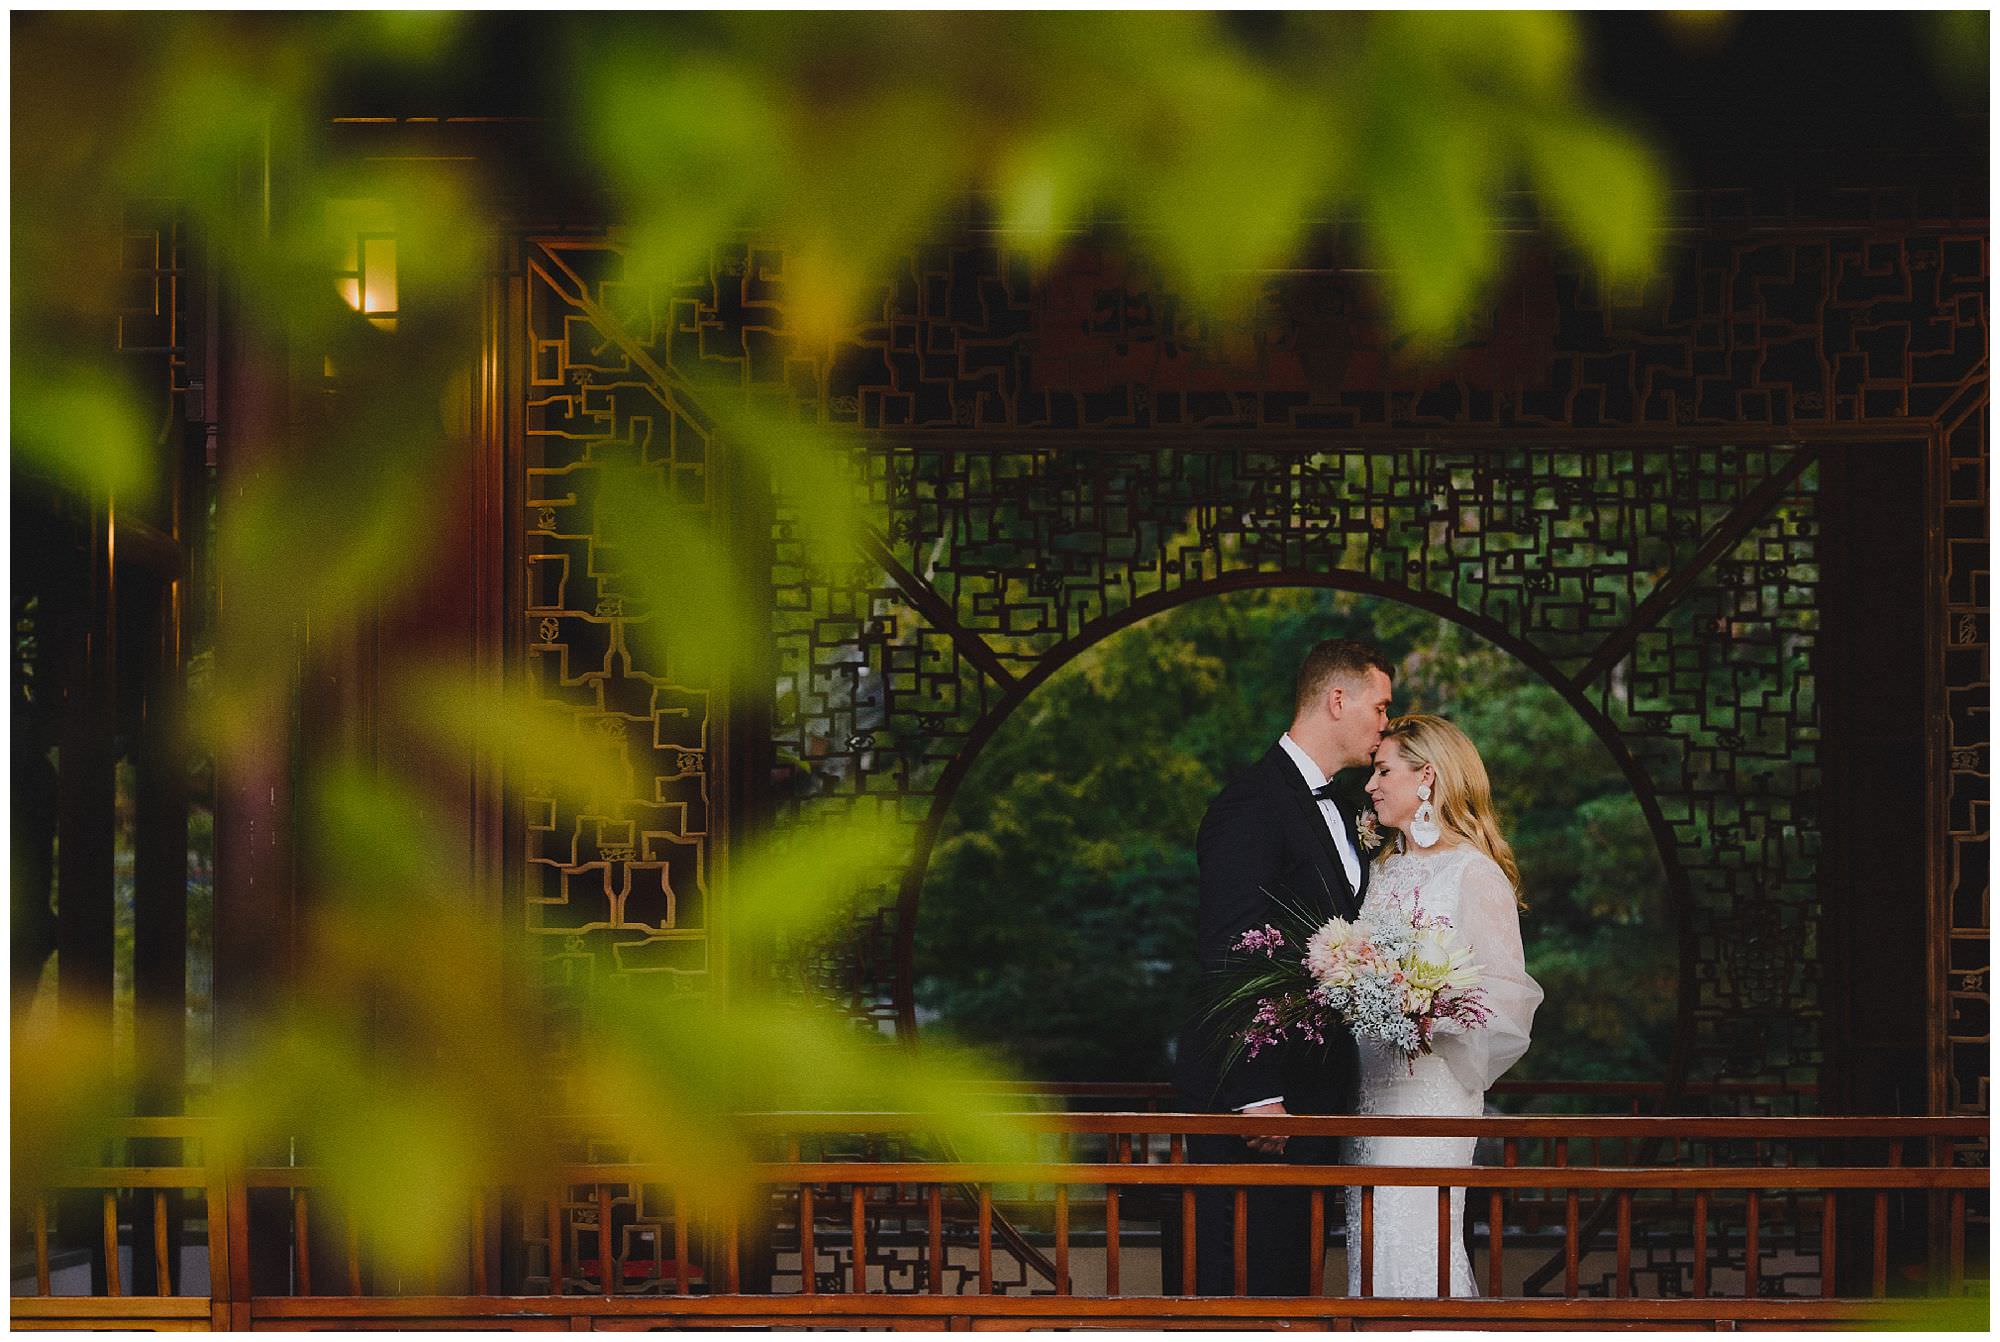 Bride and Groom kiss at sunset after their wedding ceremony at Dr. Sun Yat-Sen Classical Chinese Gardens, elopement, intimate wedding, candid wedding photography